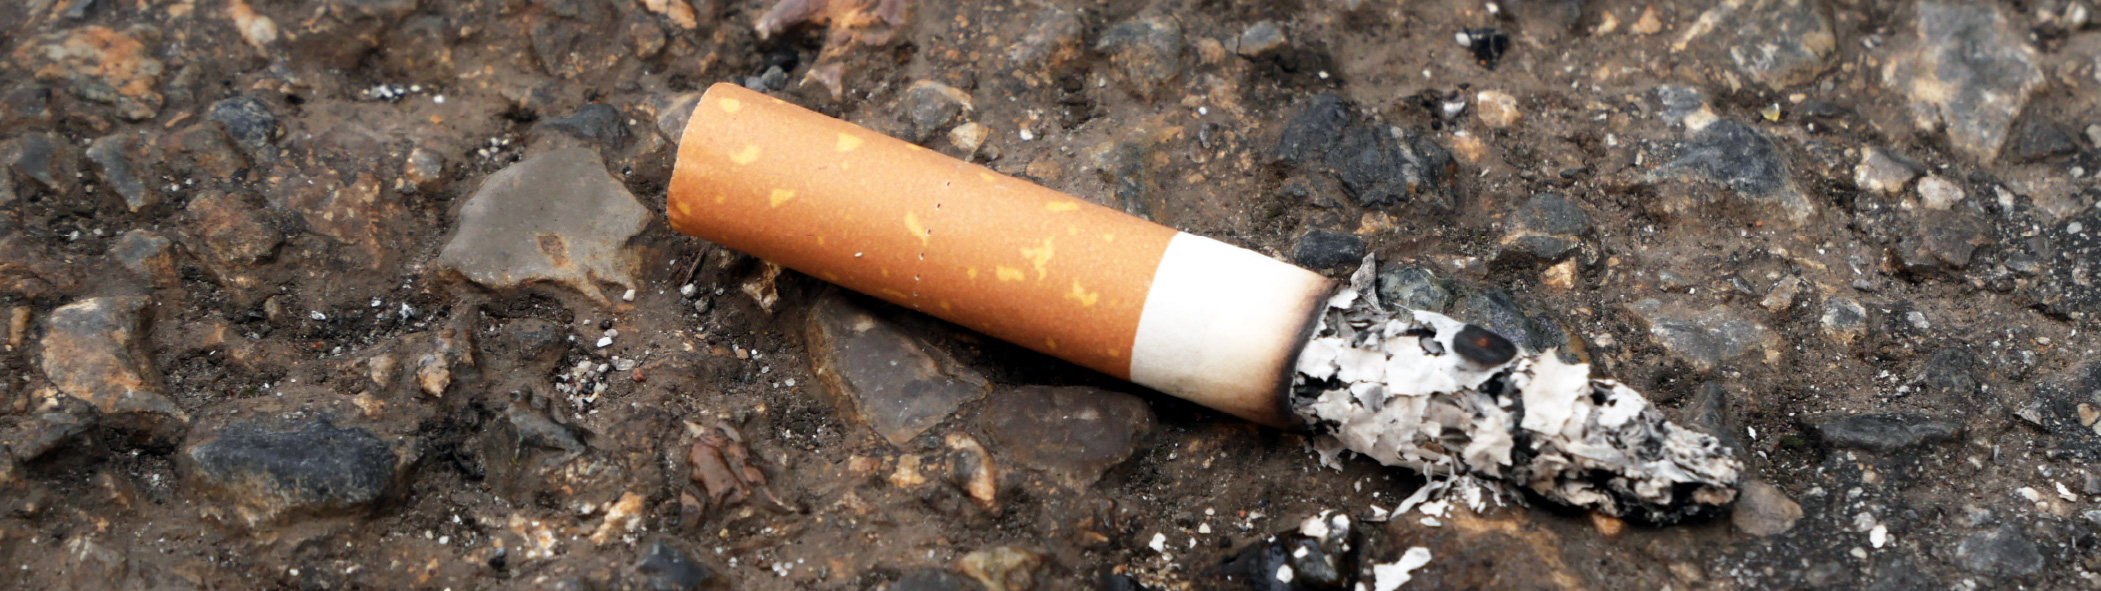 A cigarette on the ground, crushed